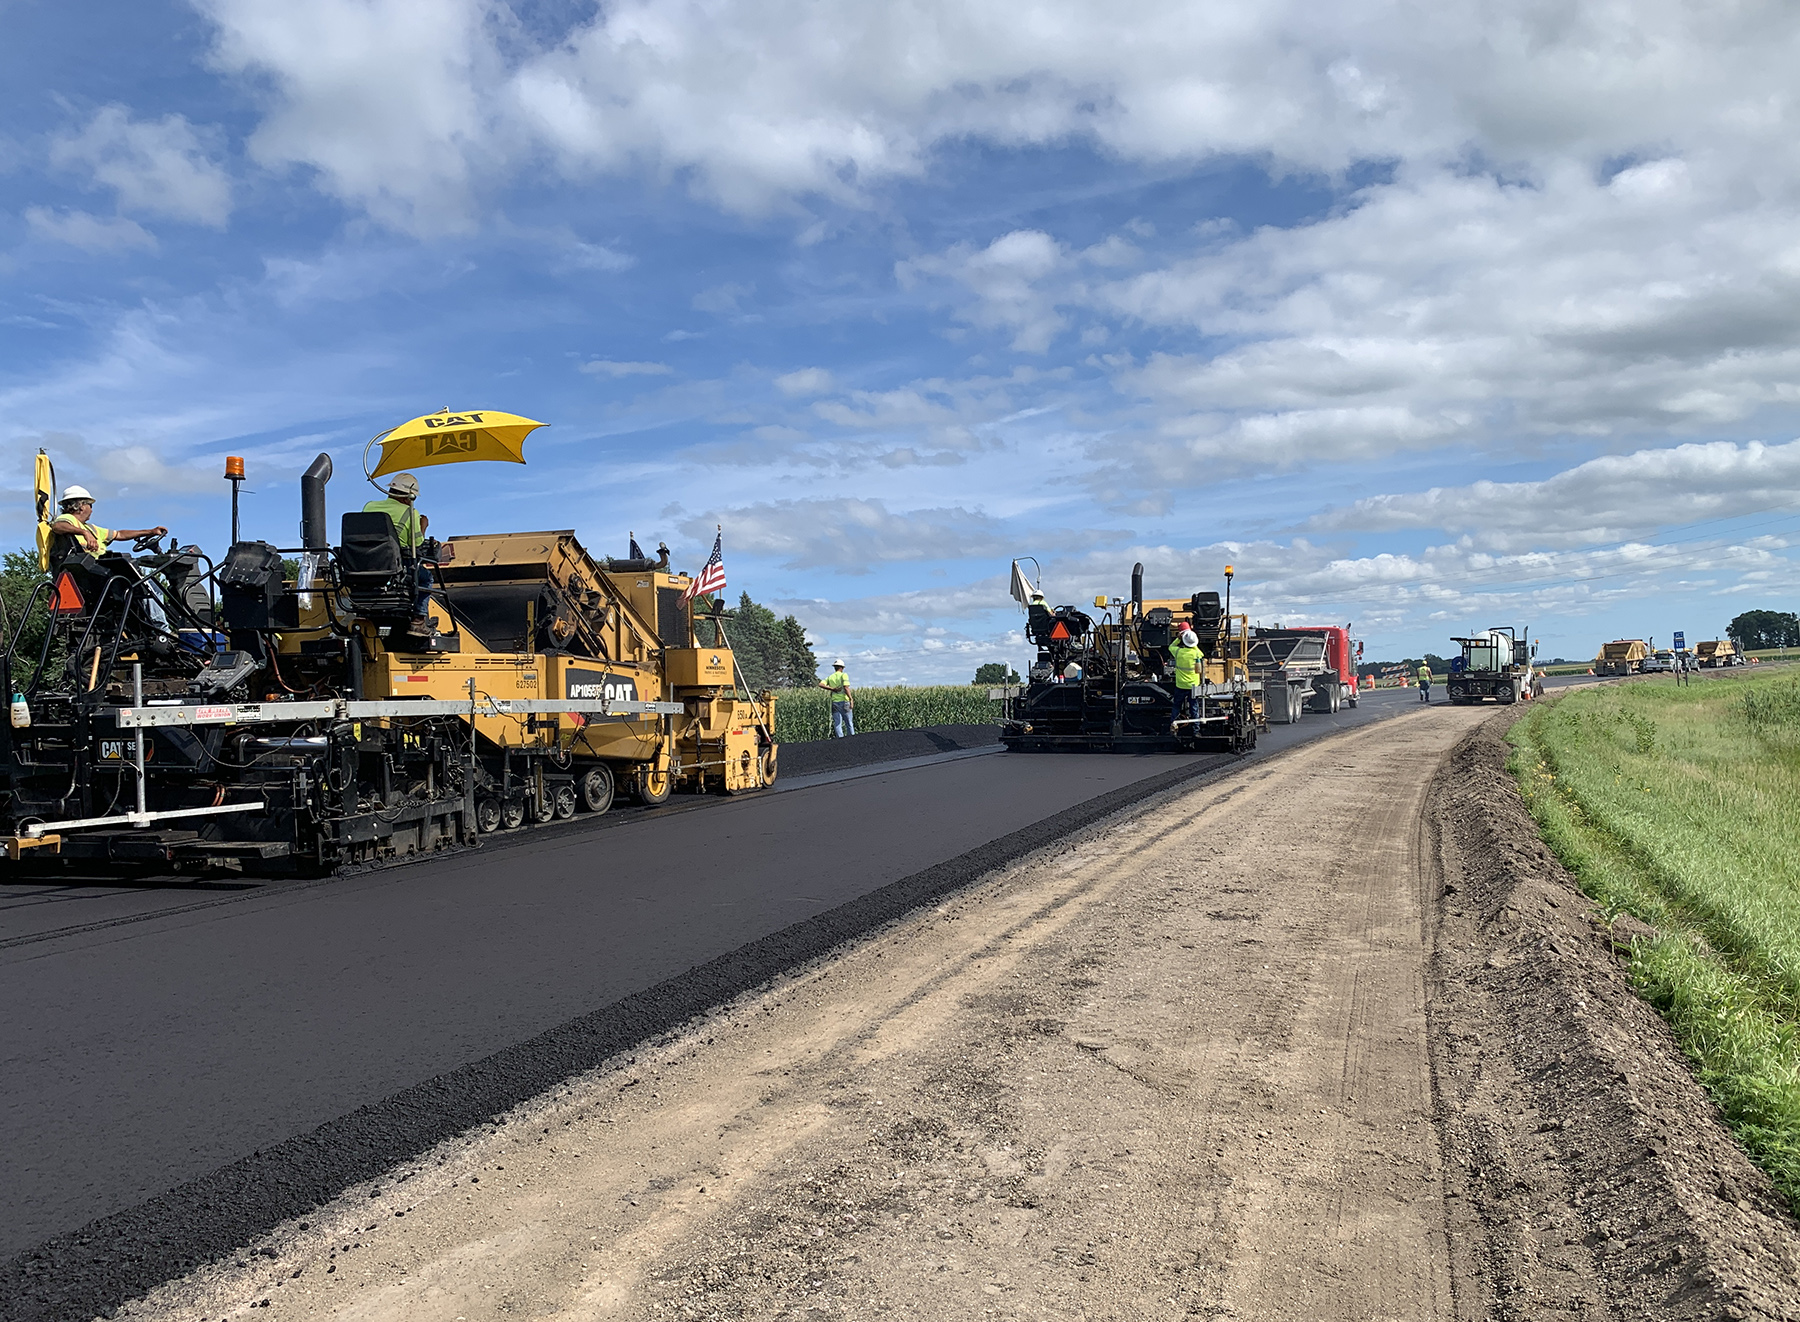 Photo: two paving machines move side-by-side down a freshly paved road